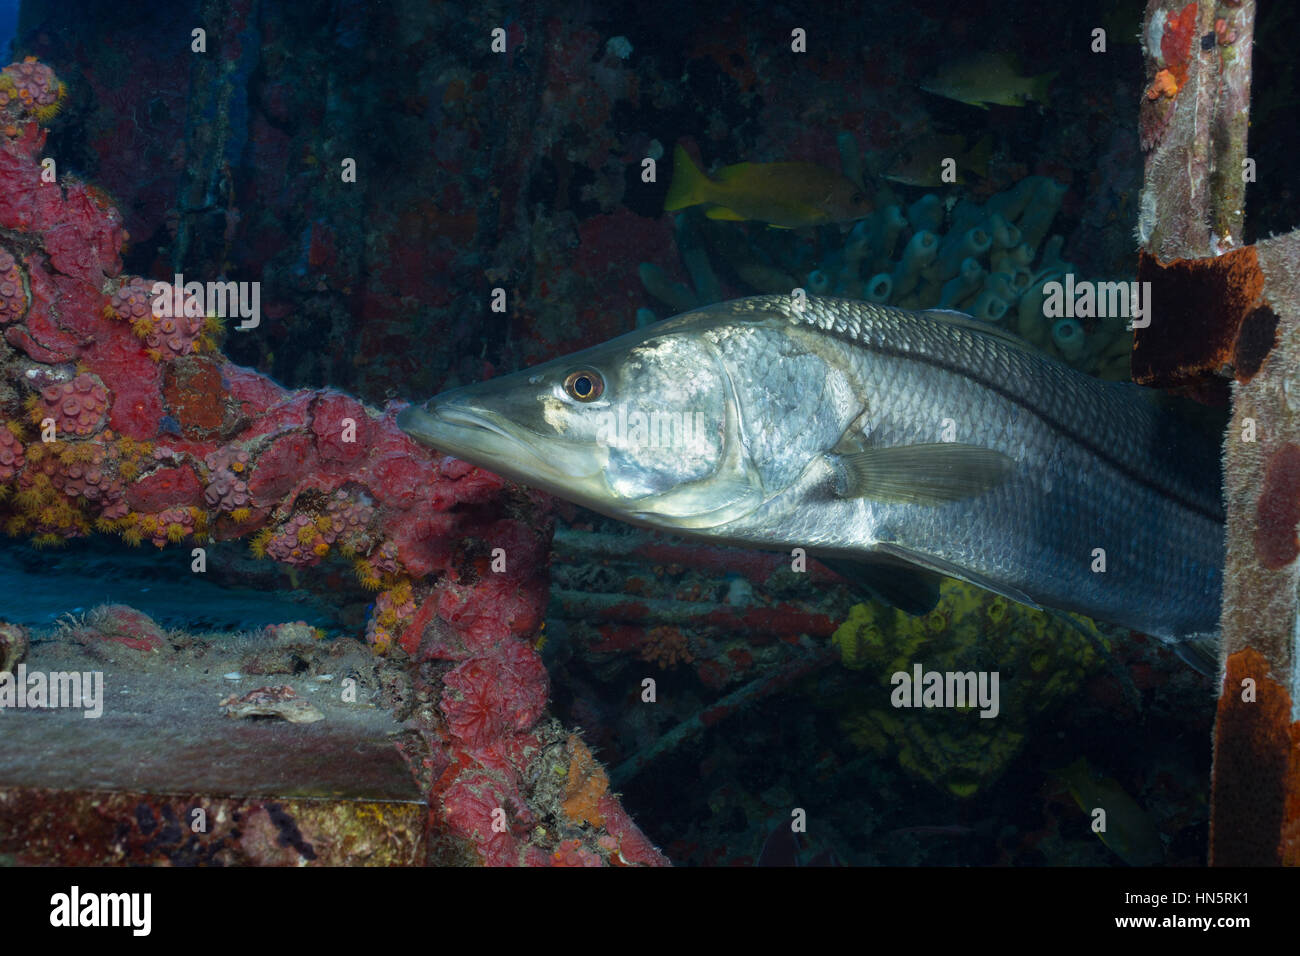 A Common snook is shown as it hides within the structure of the Aquarius Reef Base. Stock Photo